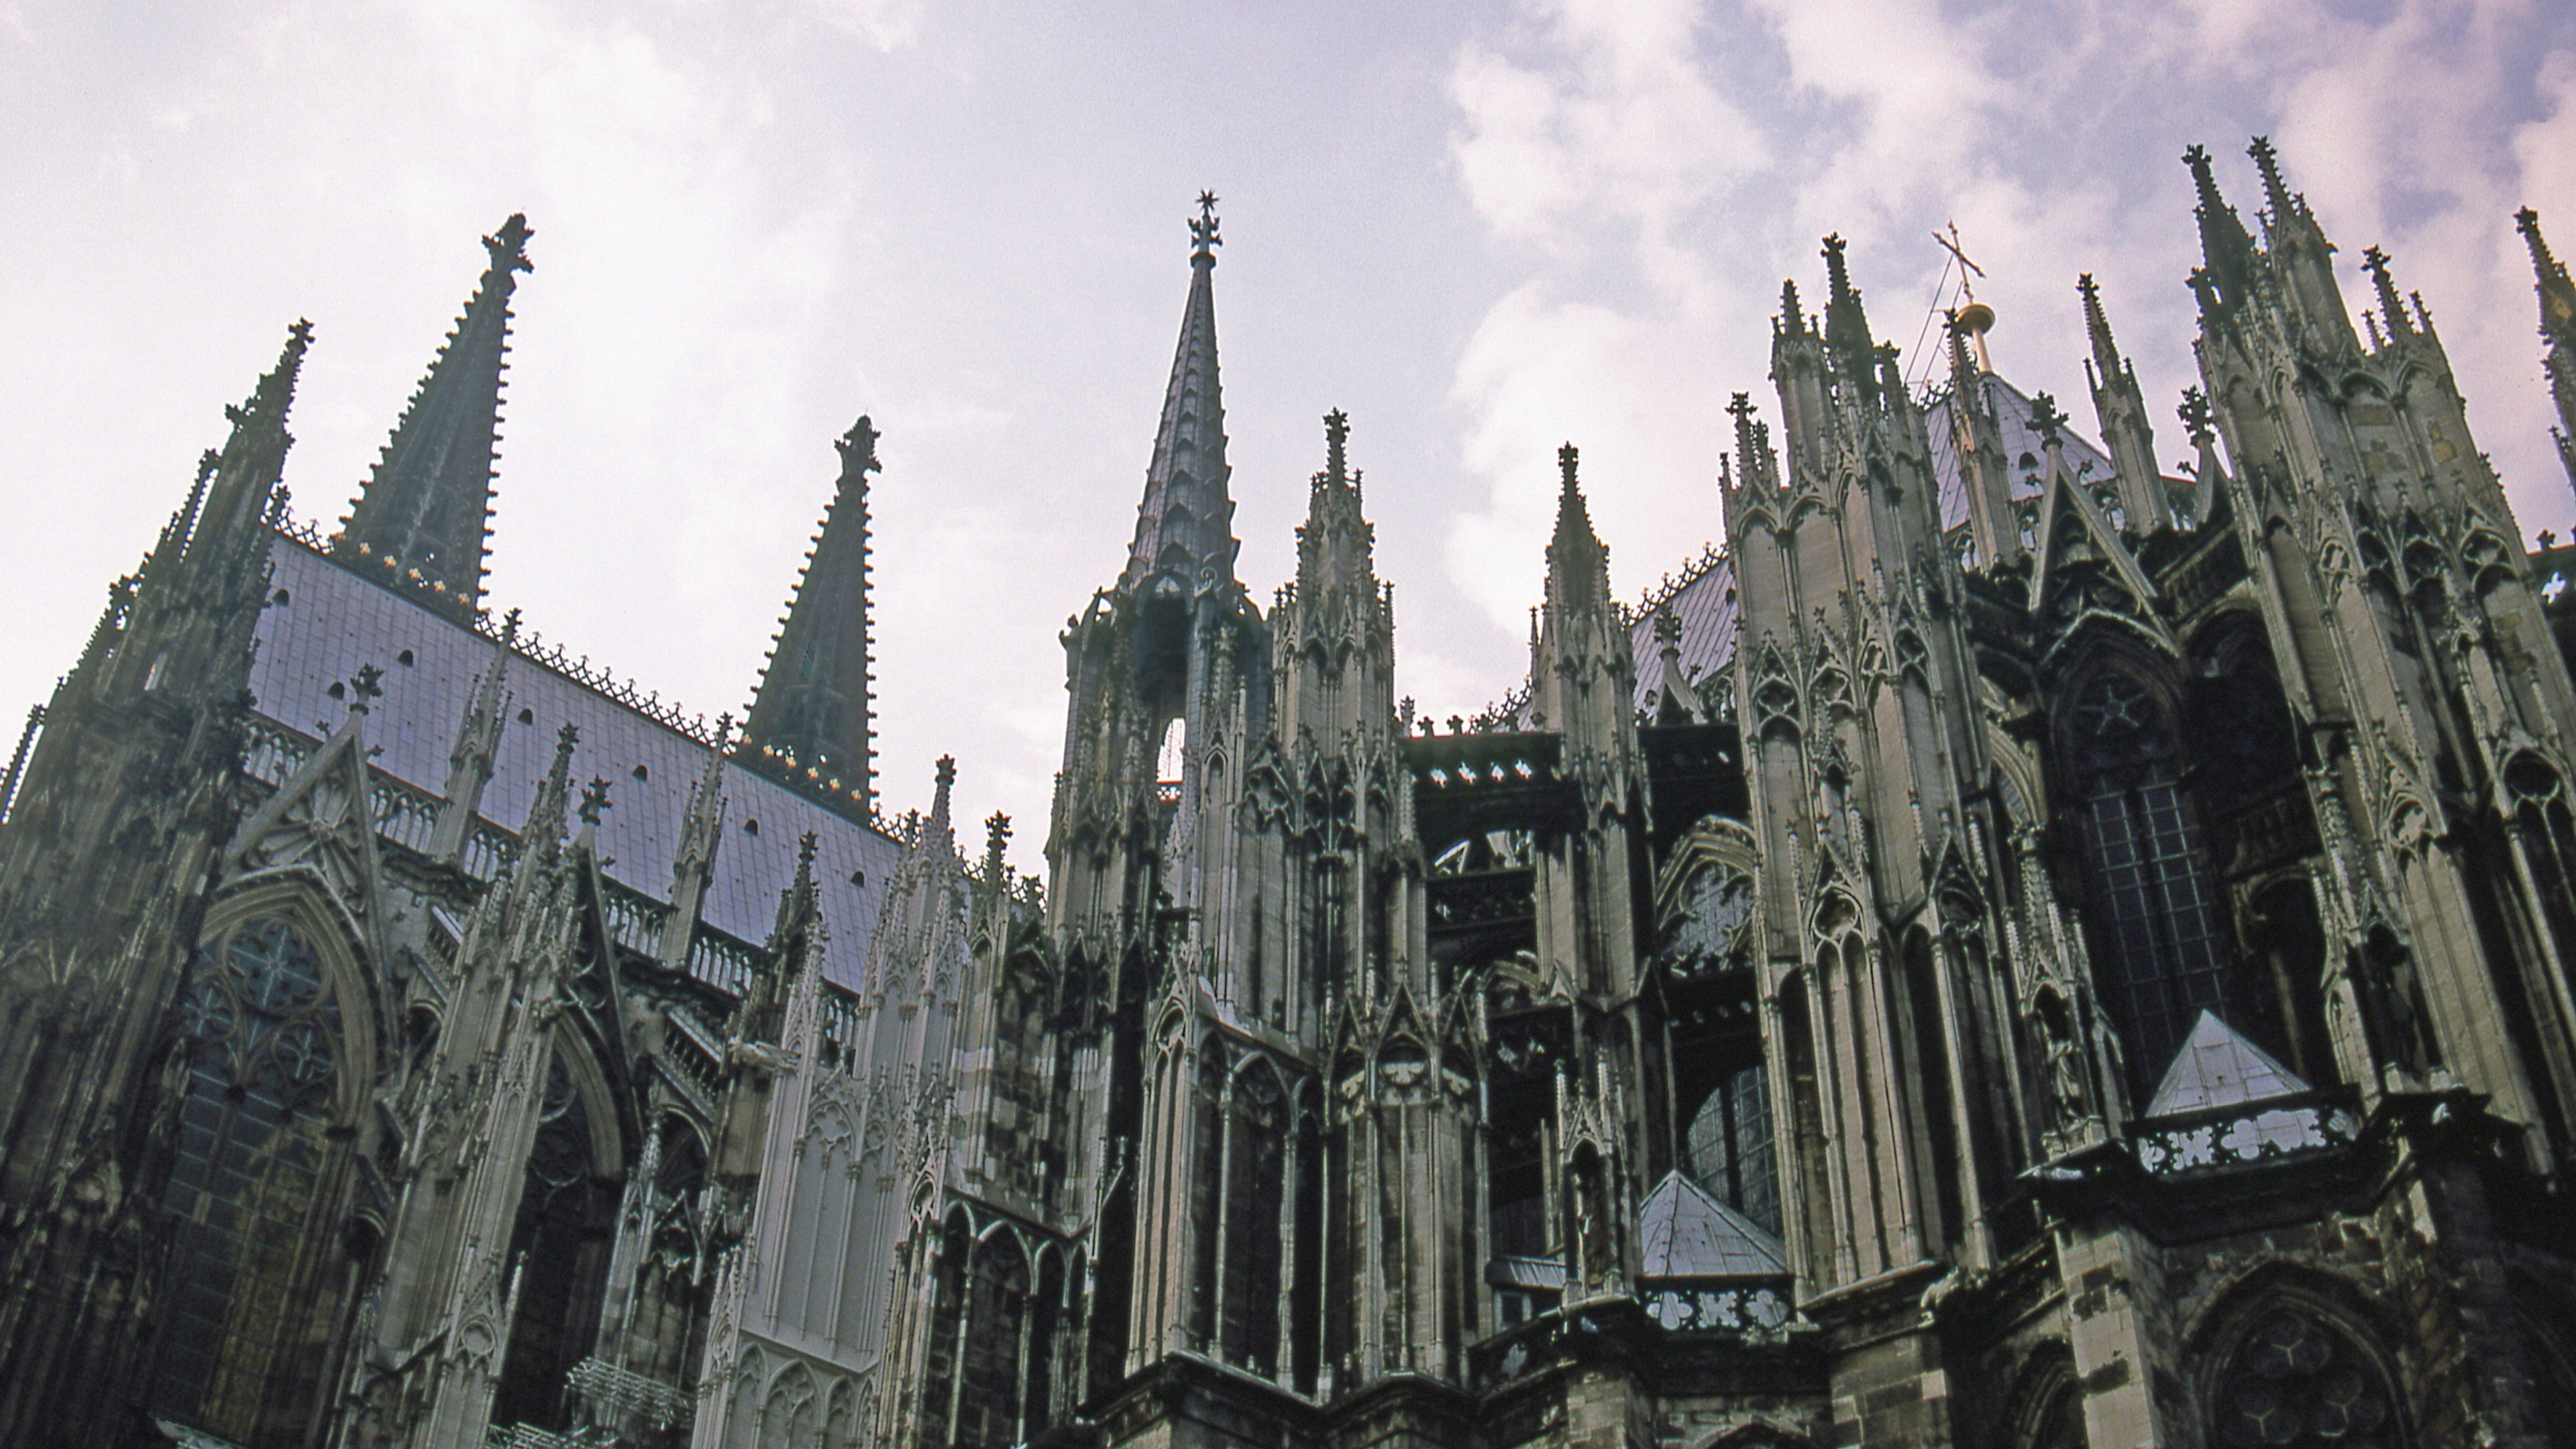 Wallpaper / flying buttresses of cologne cathedral 4k wallpaper free download